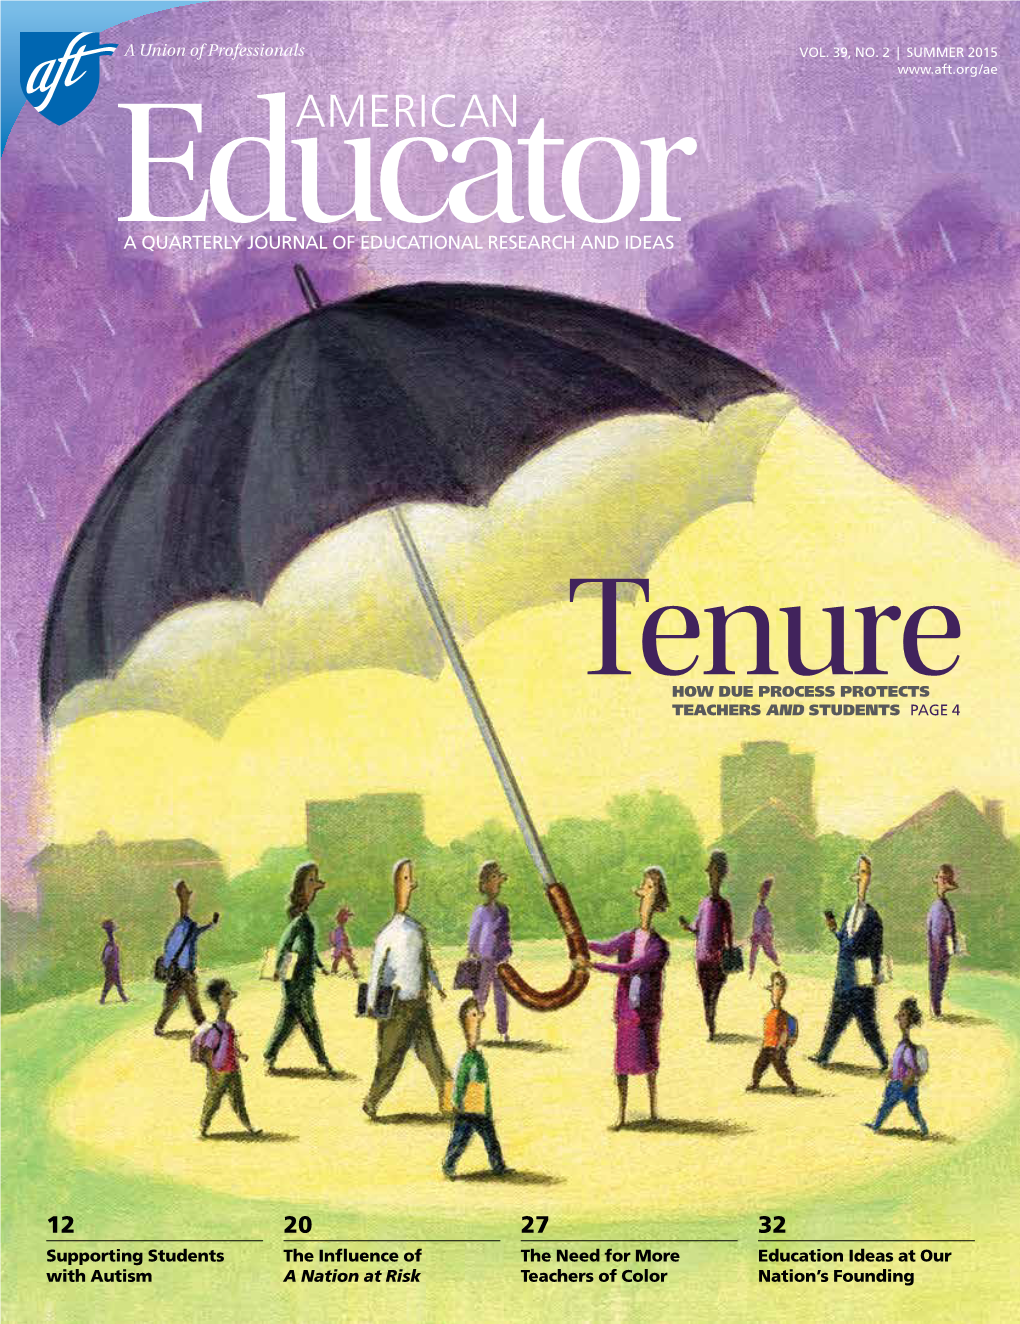 Tenure: How Due Process Protects Teachers and Students, American